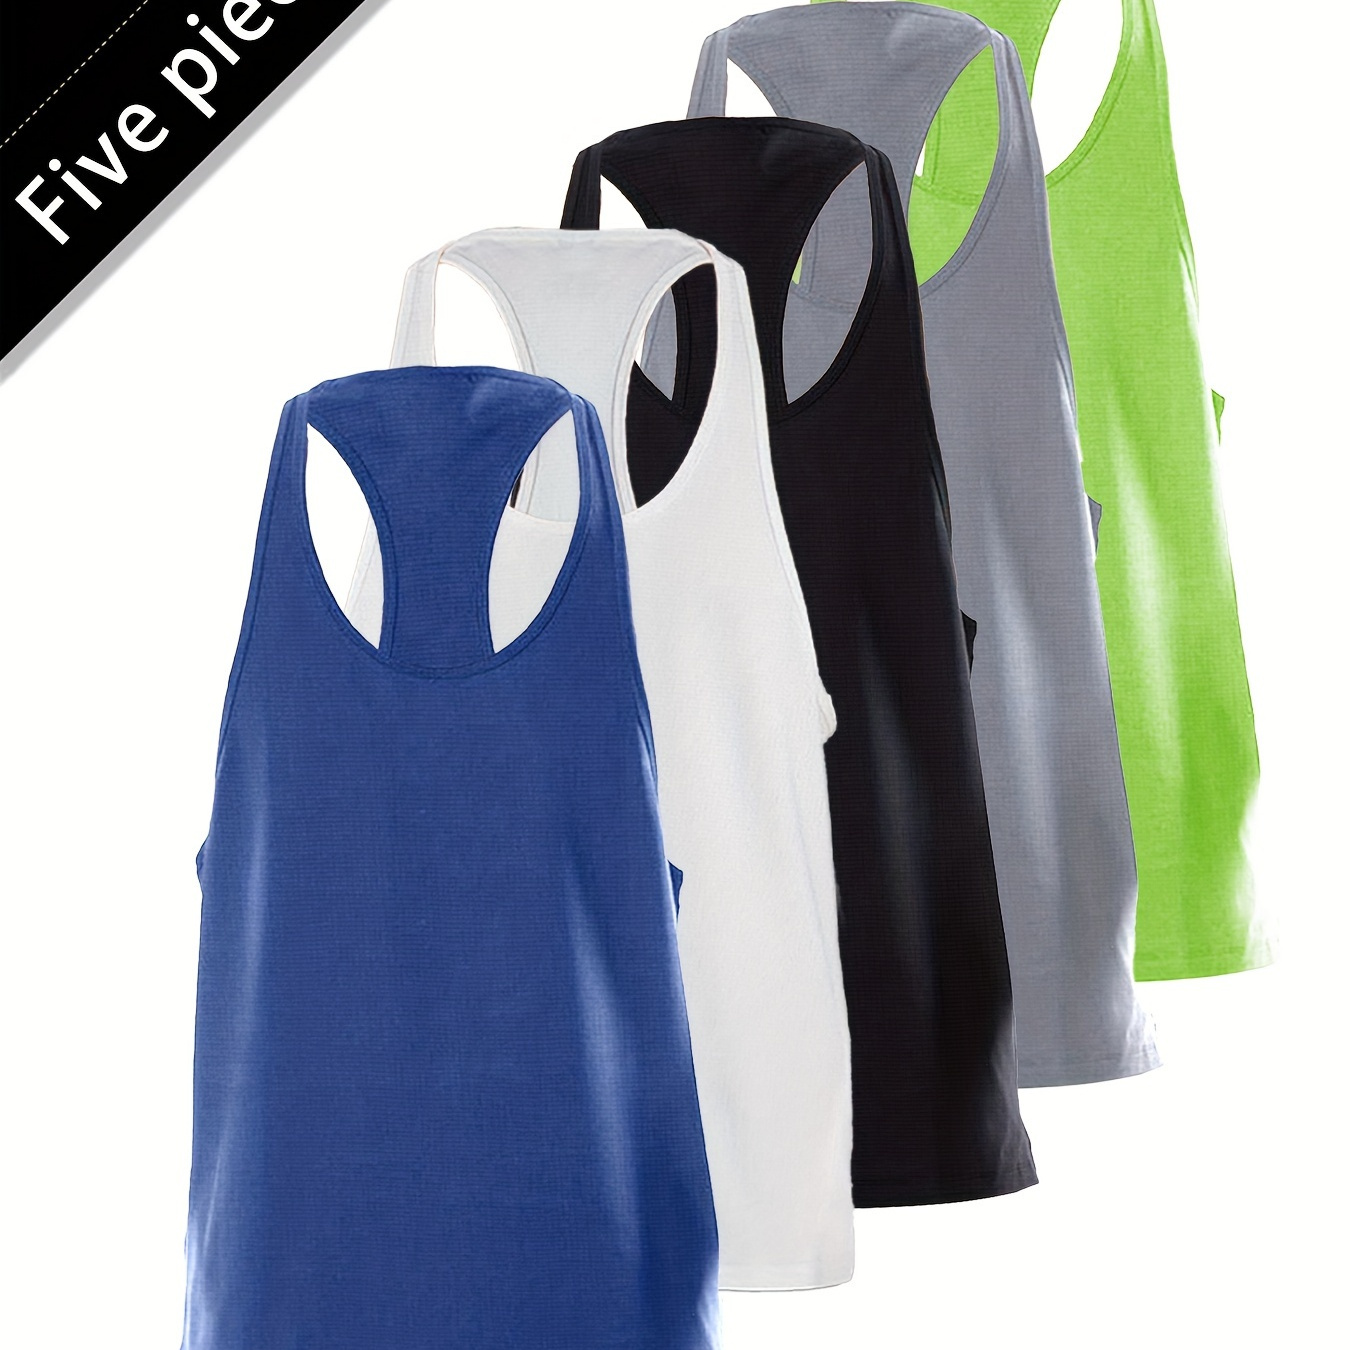 

5 Pack Men's Sports Tank Top In Solid Color, Sleeveless Basketball Training Vest, Athletic Sportswear, Breathable And High Elastic